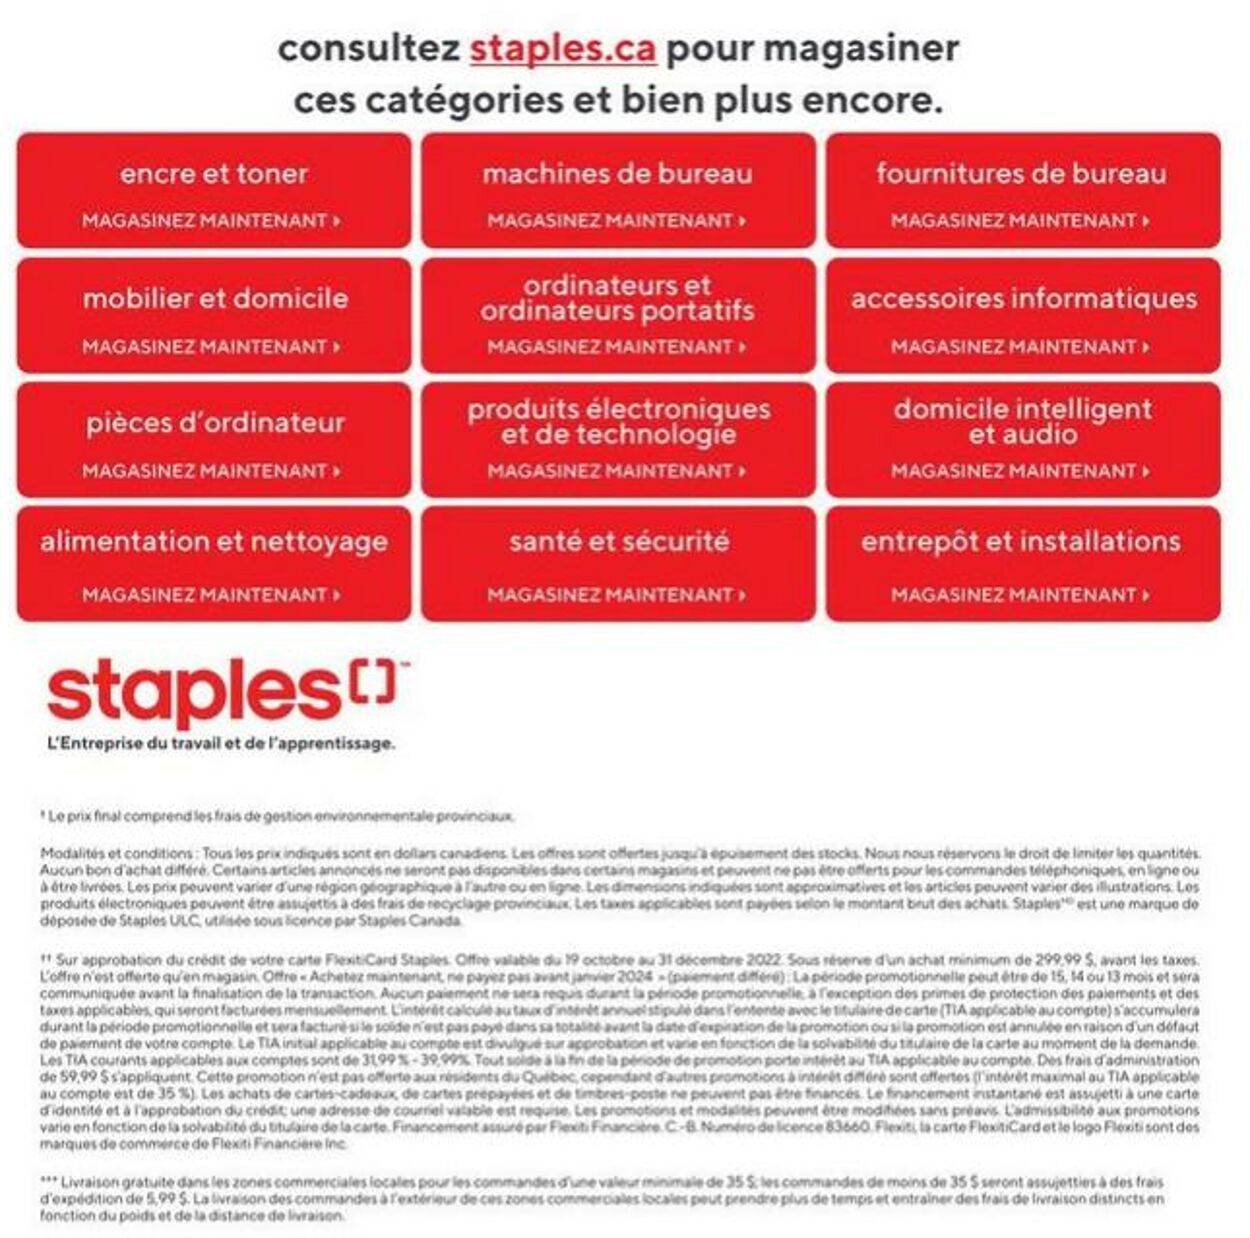 Circulaire Staples 14.12.2022 - 24.12.2022